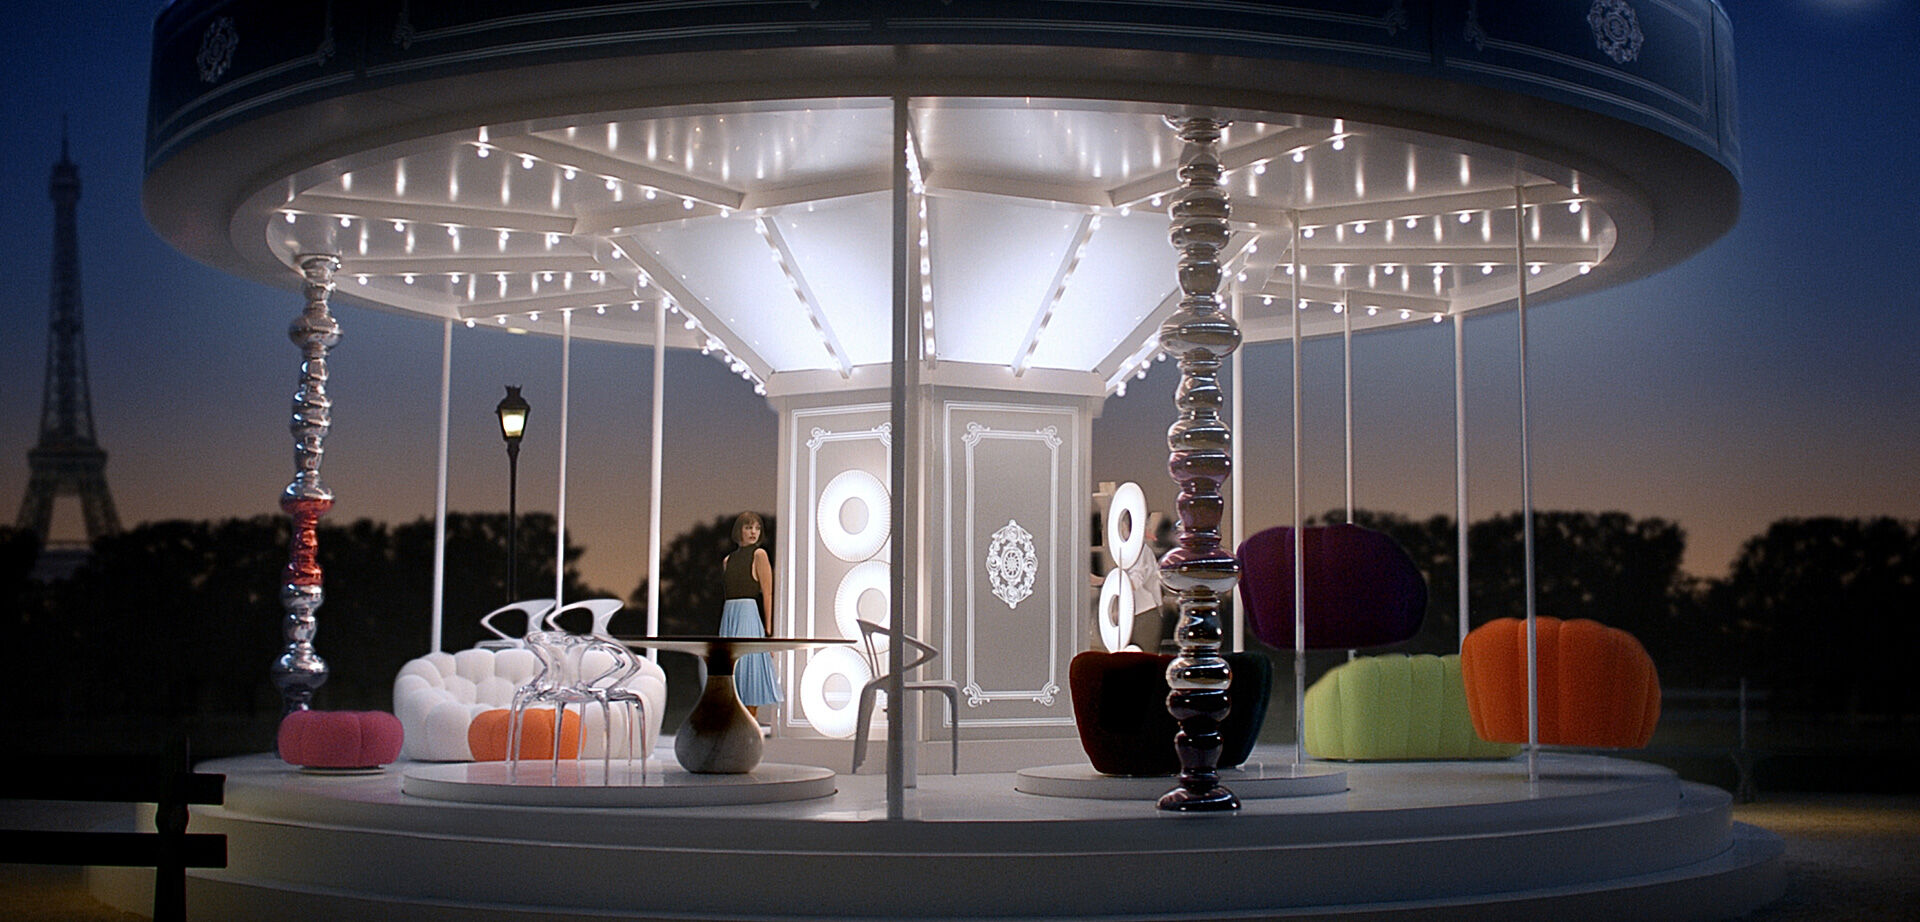 Roche Bobois’ iconic pieces from the advertising film 